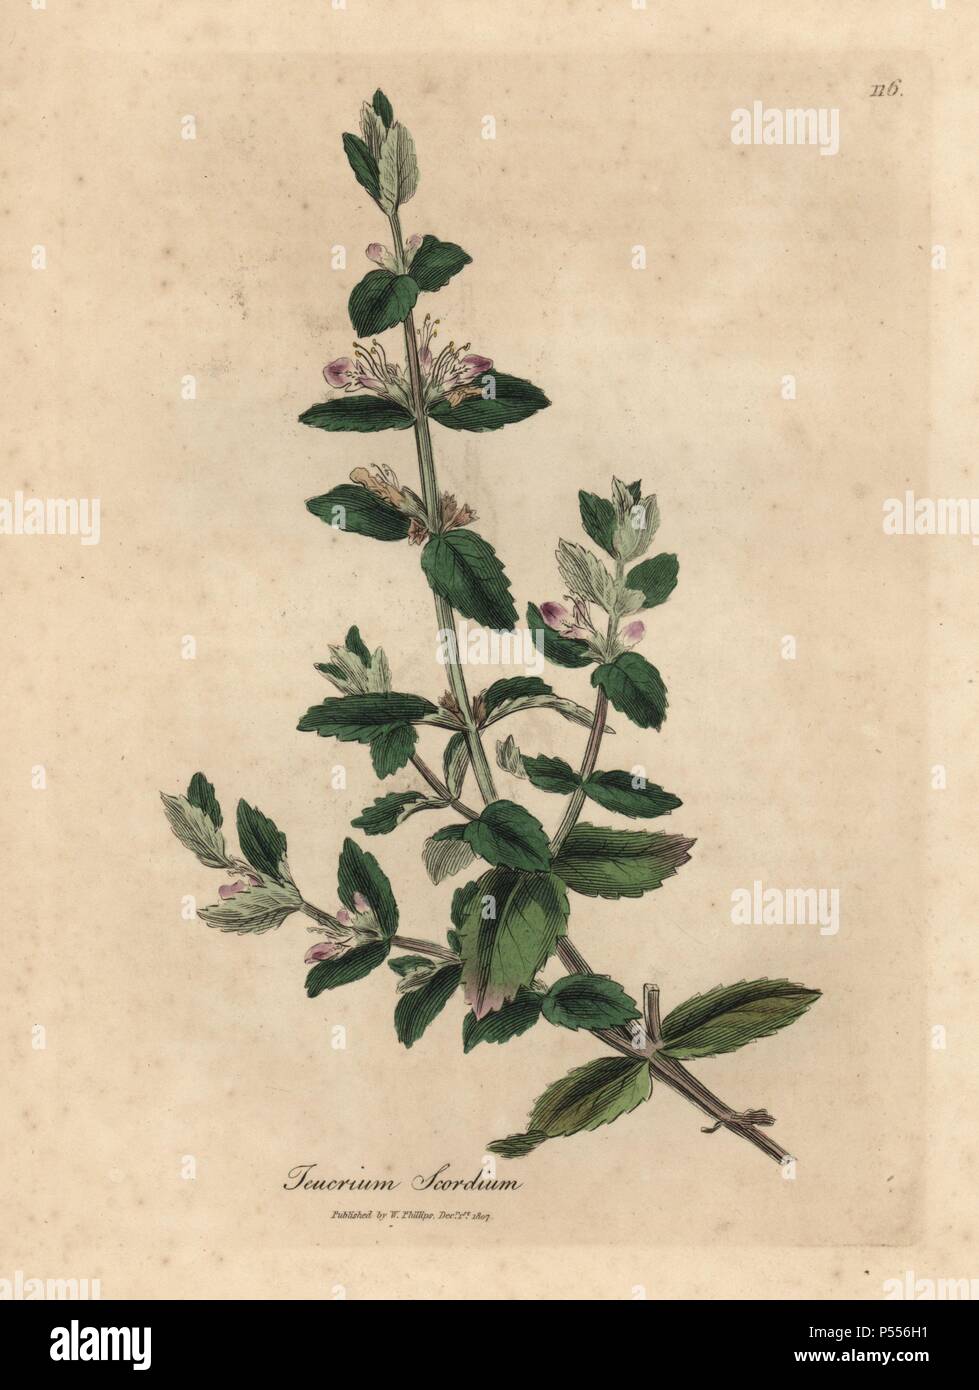 Water germander, Teucrium scordium. Handcoloured copperplate engraving from a botanical illustration by James Sowerby from William Woodville and Sir William Jackson Hooker's 'Medical Botany,' John Bohn, London, 1832. The tireless Sowerby (1757-1822) drew over 2, 500 plants for Smith's mammoth 'English Botany' (1790-1814) and 440 mushrooms for 'Coloured Figures of English Fungi ' (1797) among many other works. Stock Photo